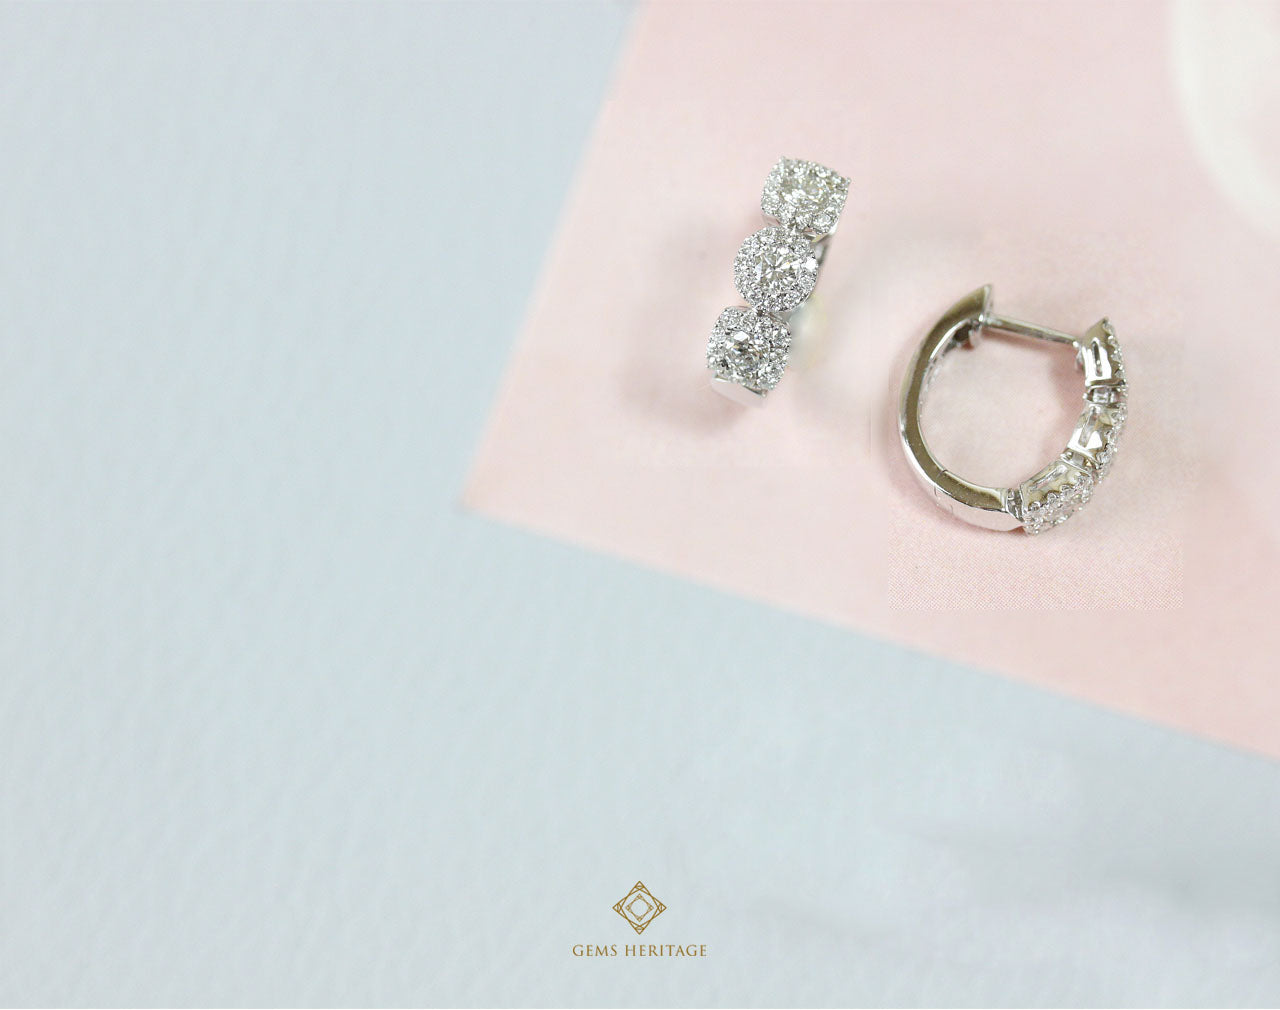 Square and Round diamond earrings